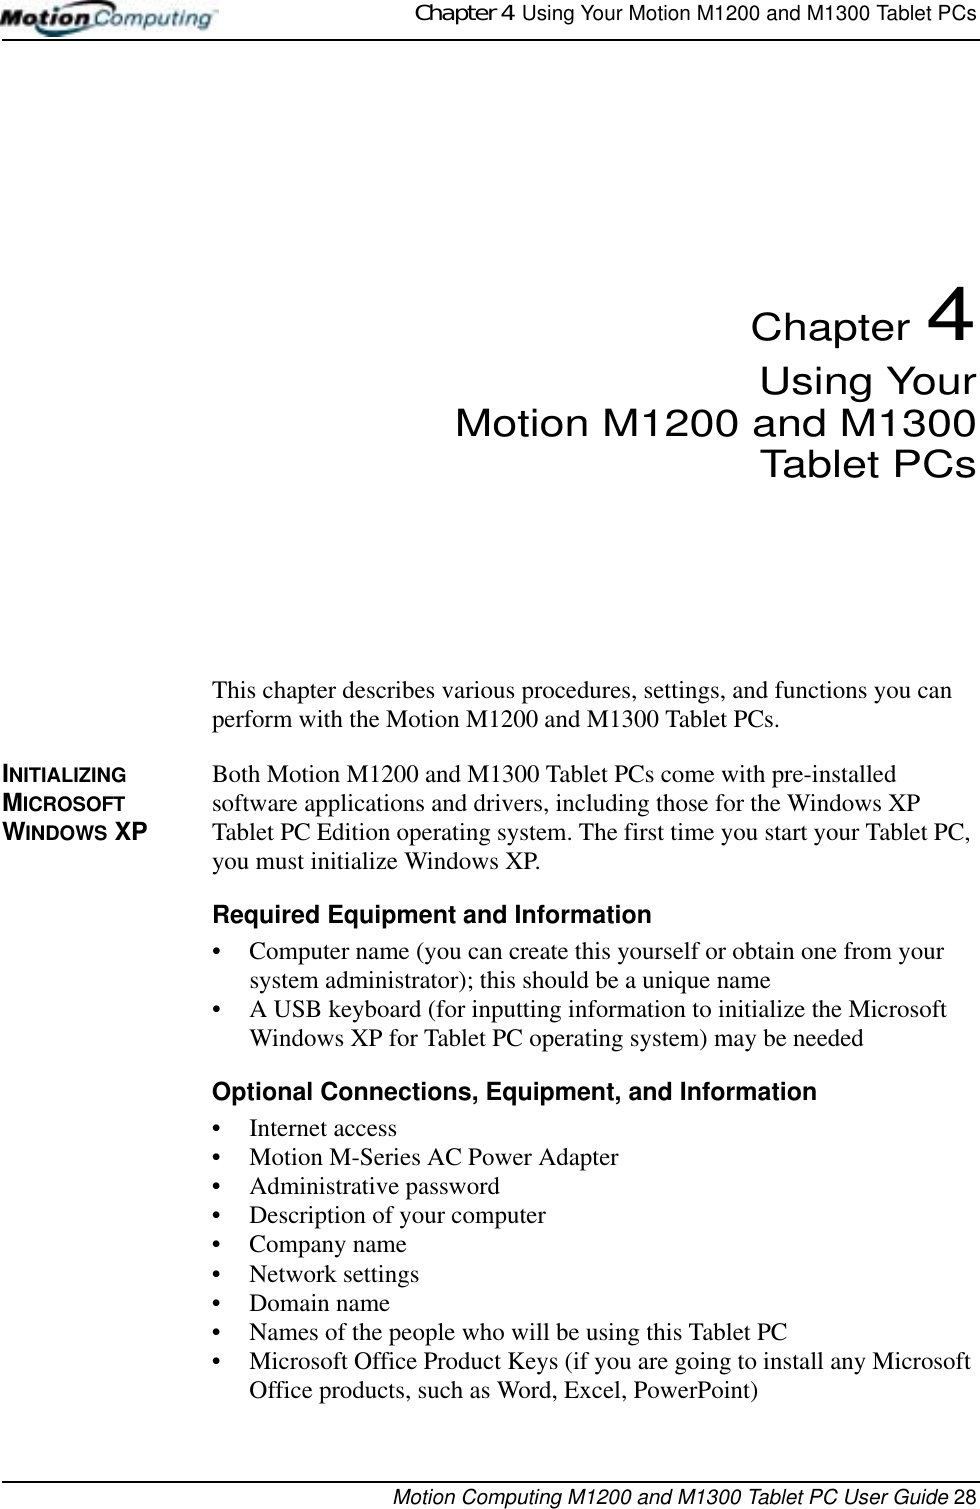 Chapter 4  Using Your Motion M1200 and M1300 Tablet PCsMotion Computing M1200 and M1300 Tablet PC User Guide 28Chapter 4Using YourMotion M1200 and M1300Tablet PCsThis chapter describes various procedures, settings, and functions you can perform with the Motion M1200 and M1300 Tablet PCs.INITIALIZING MICROSOFT WINDOWS XPBoth Motion M1200 and M1300 Tablet PCs come with pre-installed software applications and drivers, including those for the Windows XP Tablet PC Edition operating system. The first time you start your Tablet PC, you must initialize Windows XP. Required Equipment and Information• Computer name (you can create this yourself or obtain one from your system administrator); this should be a unique name• A USB keyboard (for inputting information to initialize the Microsoft Windows XP for Tablet PC operating system) may be neededOptional Connections, Equipment, and Information• Internet access• Motion M-Series AC Power Adapter• Administrative password• Description of your computer• Company name • Network settings • Domain name• Names of the people who will be using this Tablet PC• Microsoft Office Product Keys (if you are going to install any Microsoft Office products, such as Word, Excel, PowerPoint)